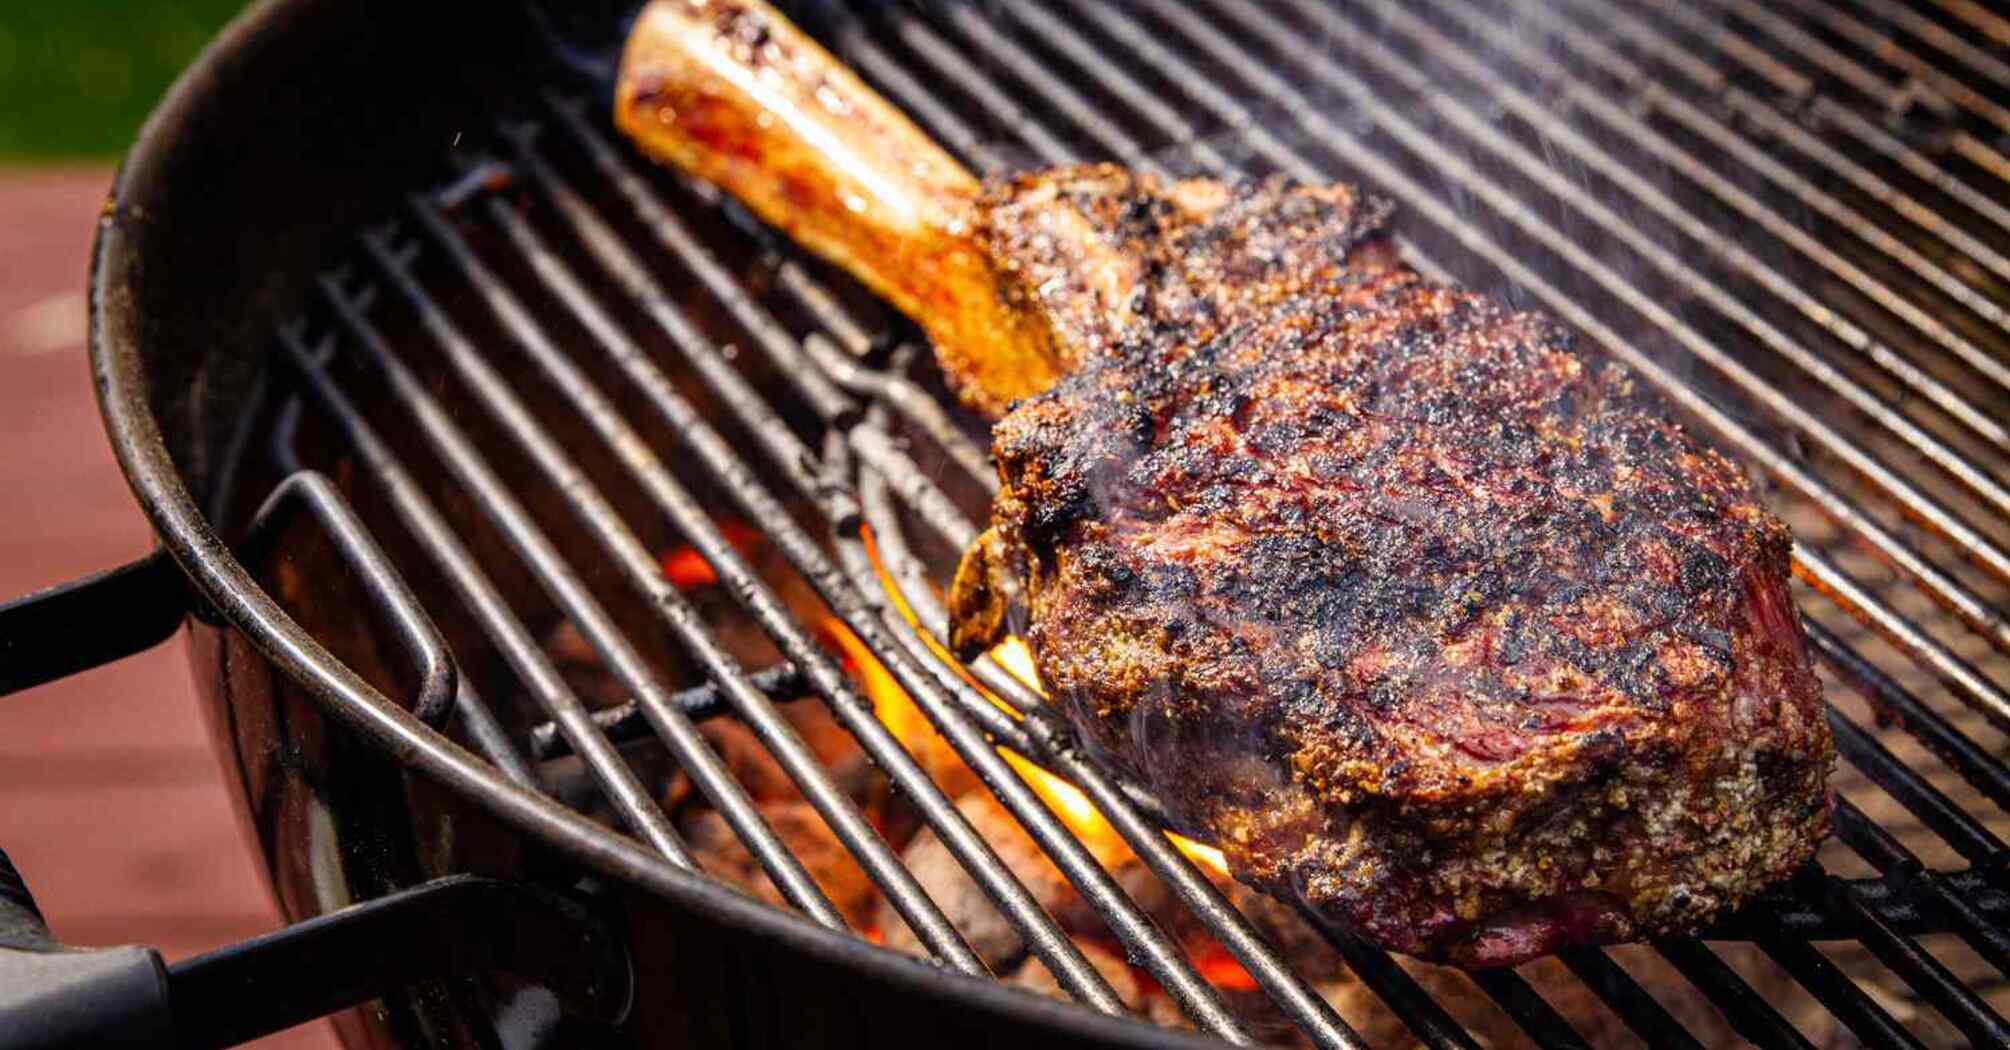 The main secret of grilling meat